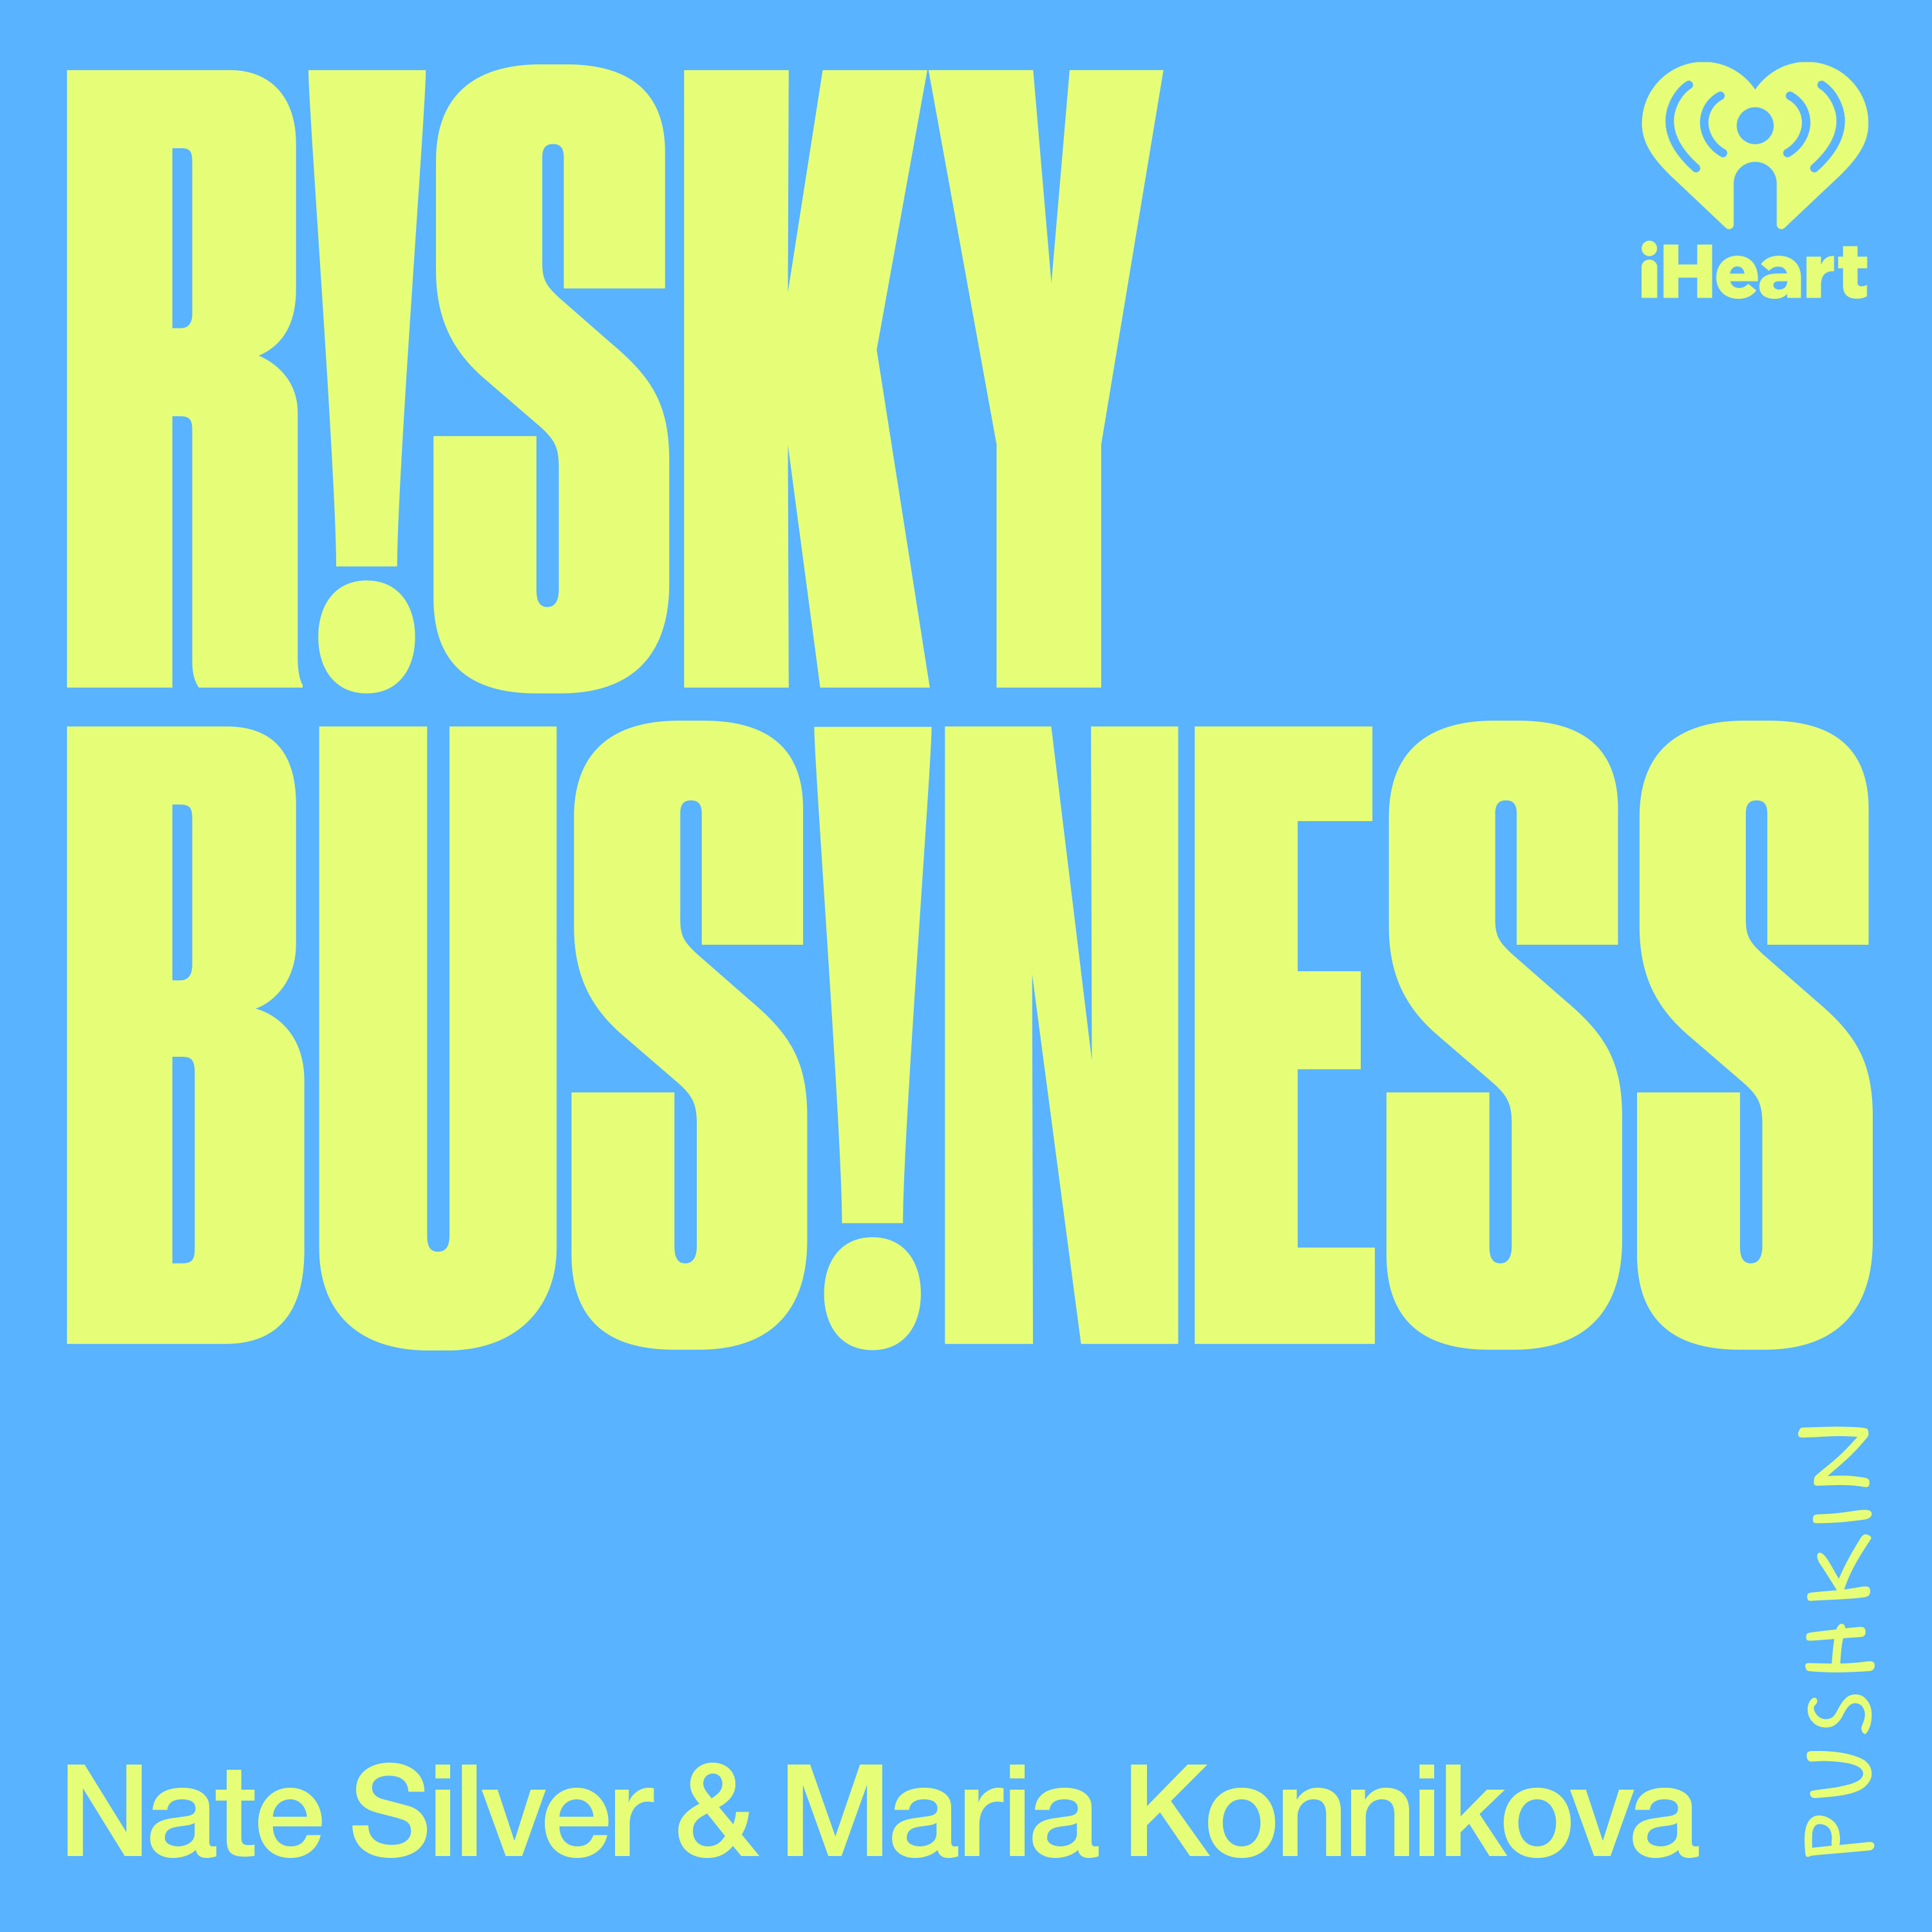 Lessons From the Final Table from Risky Business with Nate Silver and Maria Konnikova